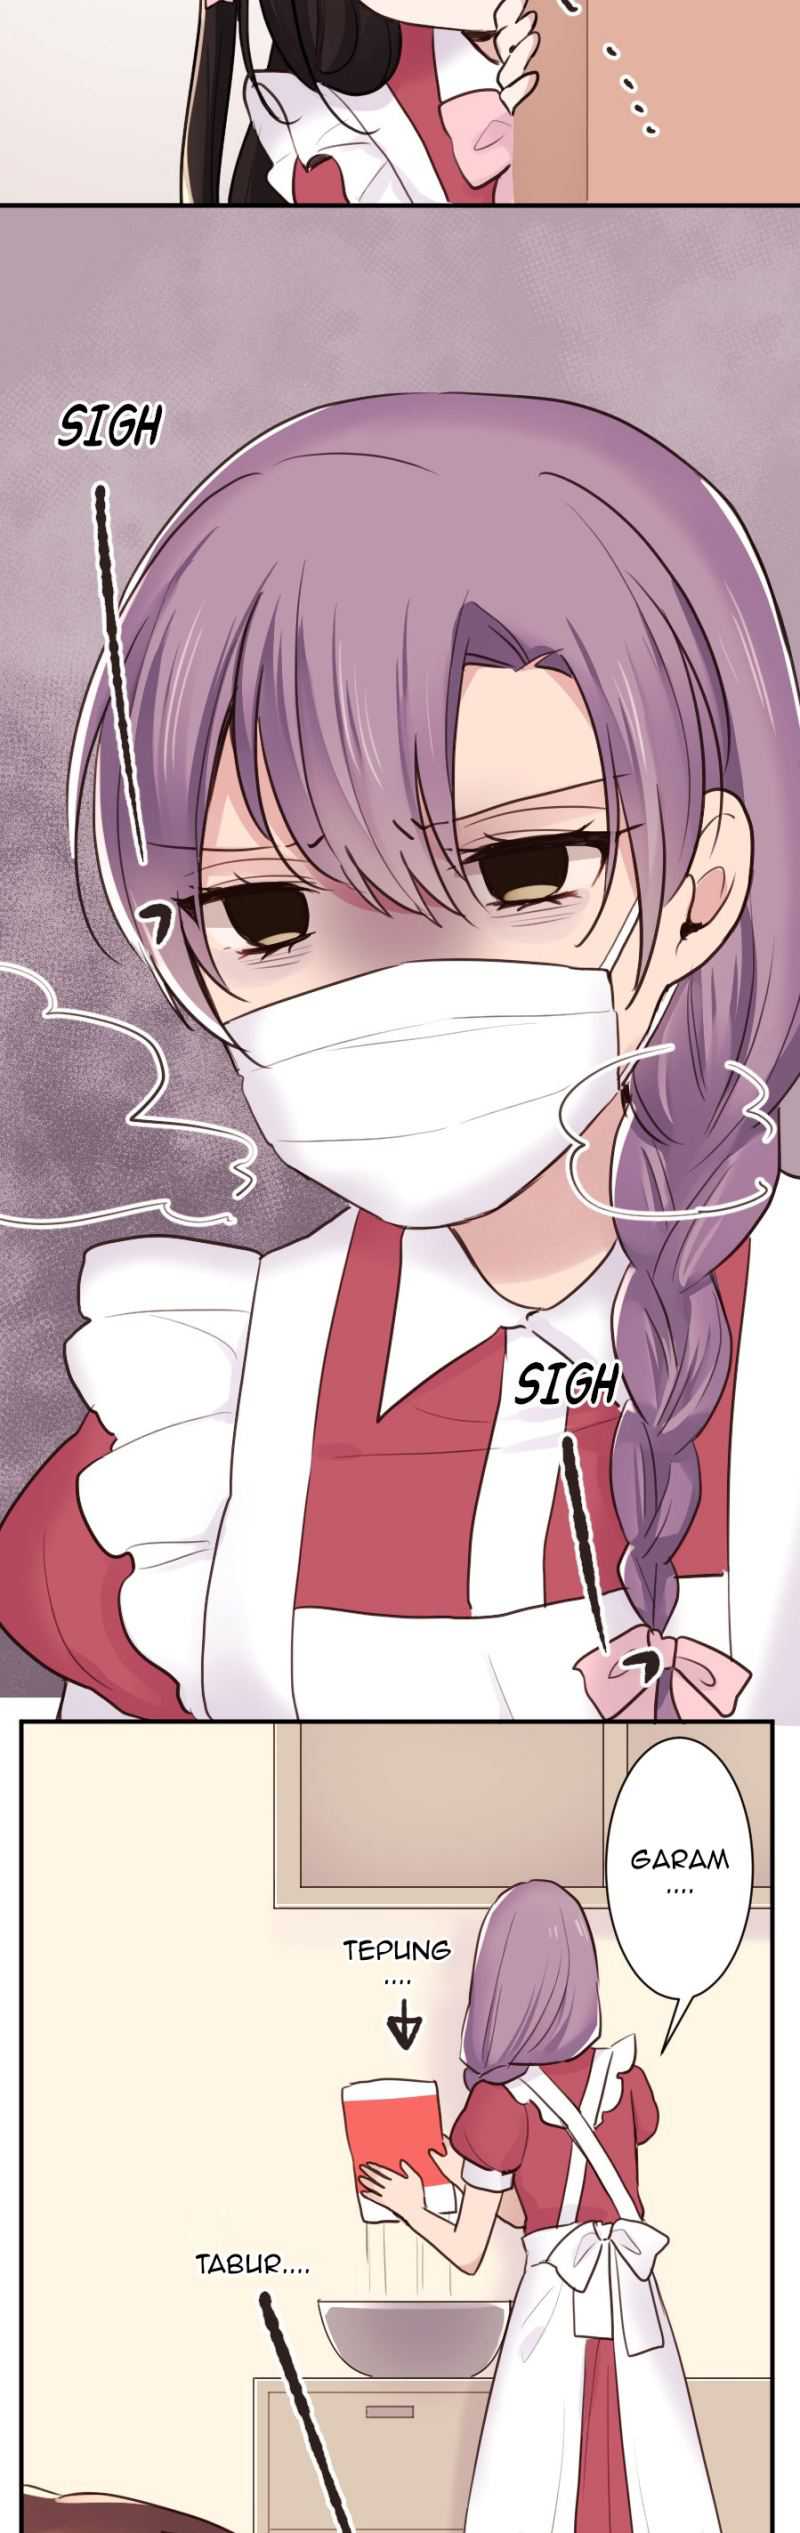 Class Maid Chapter 22